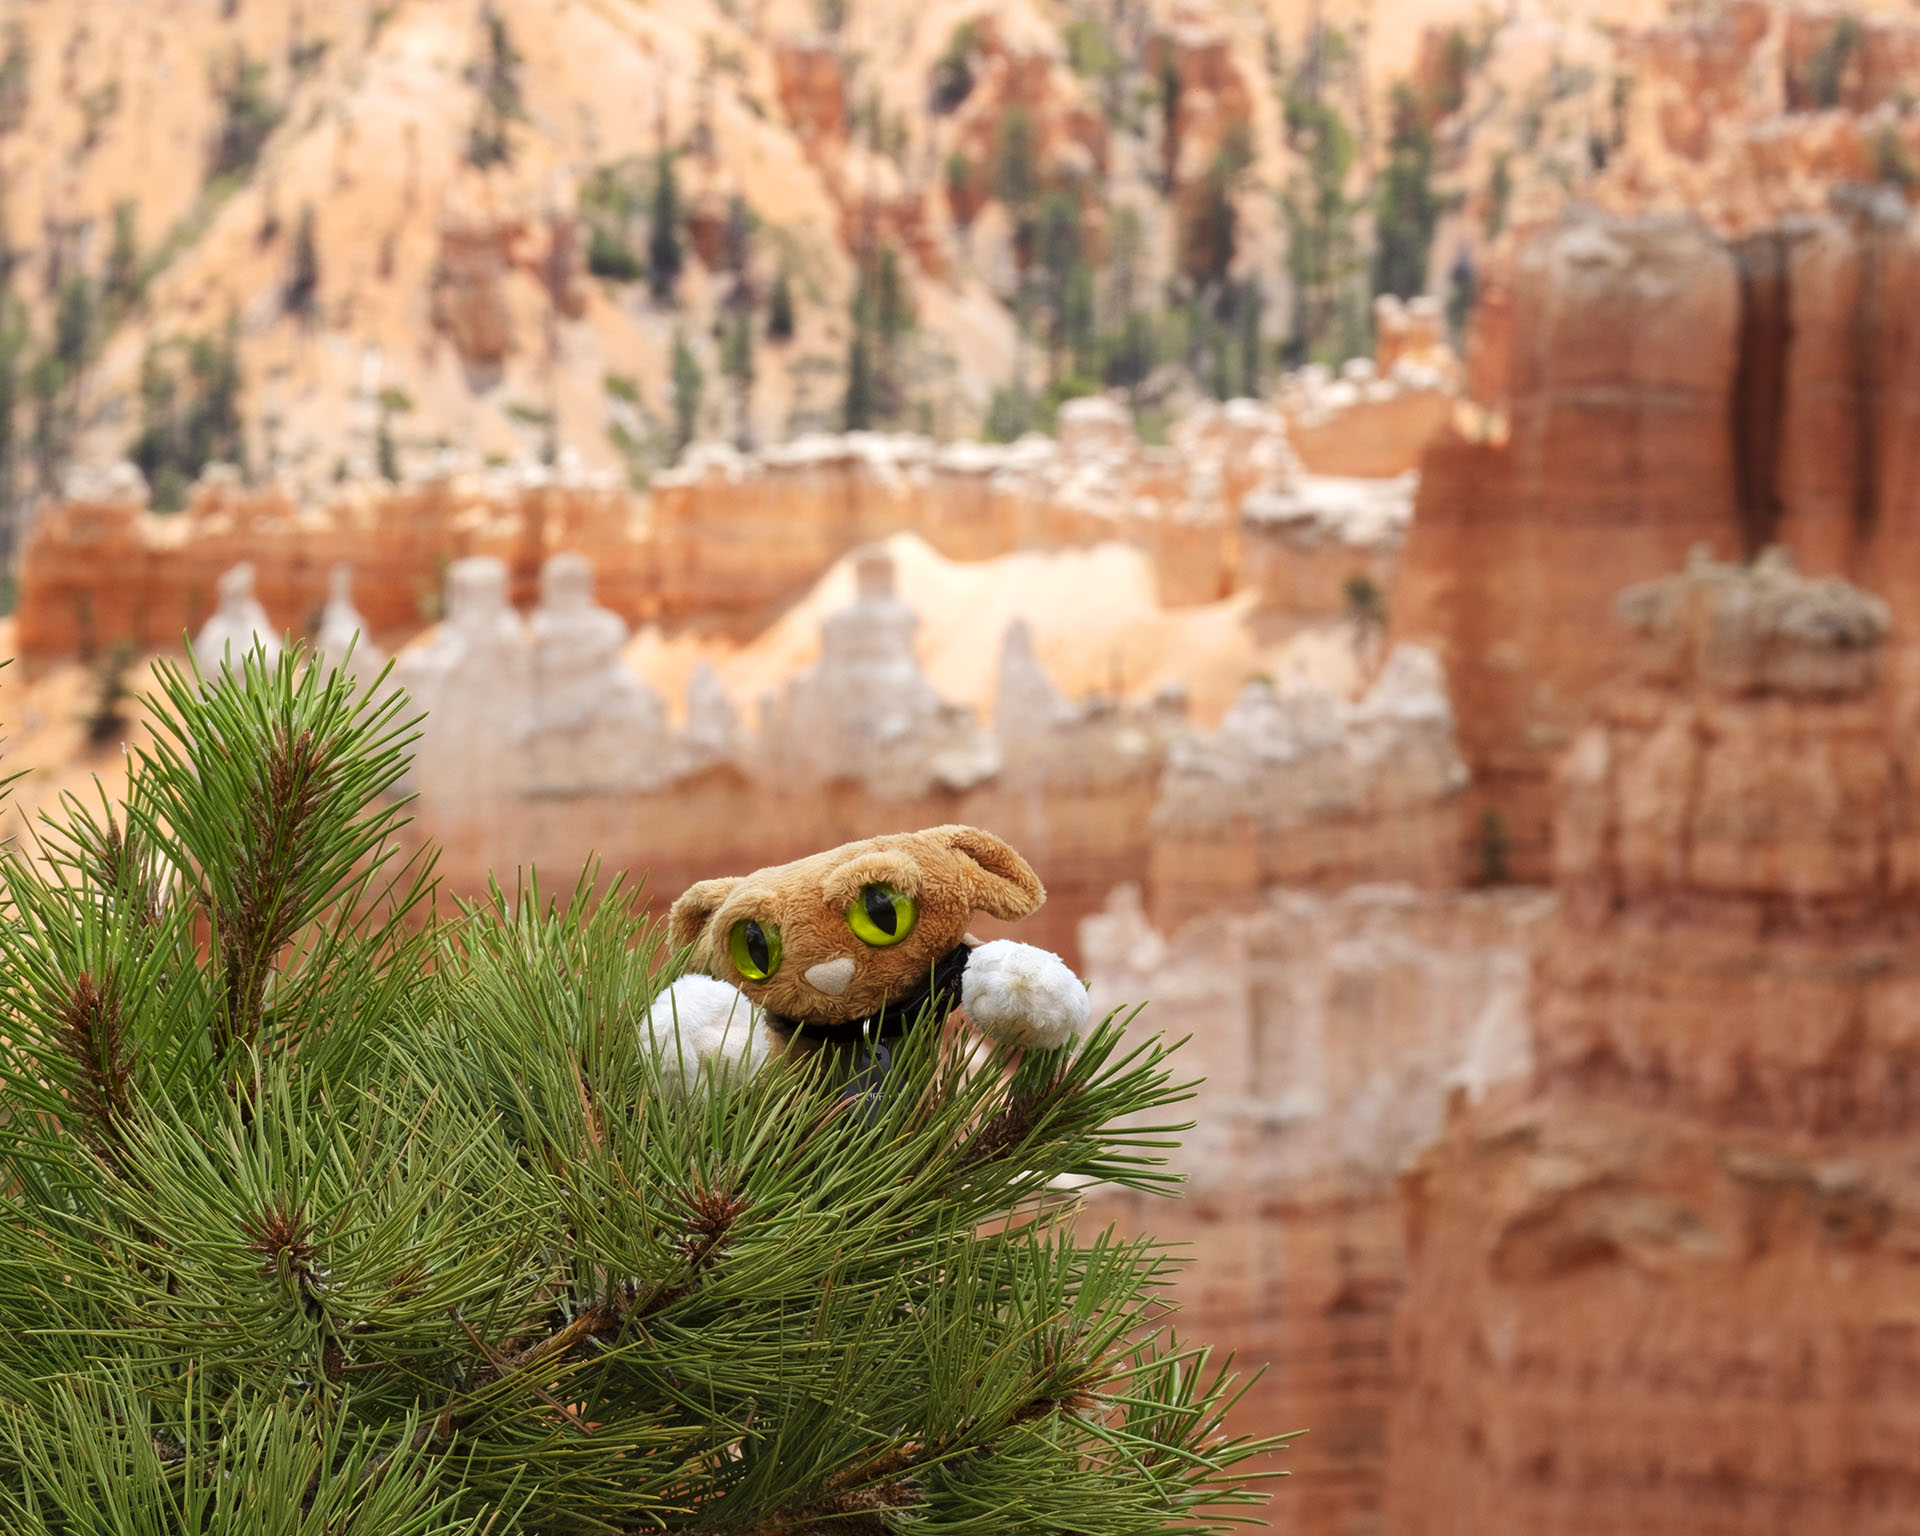 Griffith the Traveling Mountain Lion climbed a tree for a better view of Bryce Canyon.